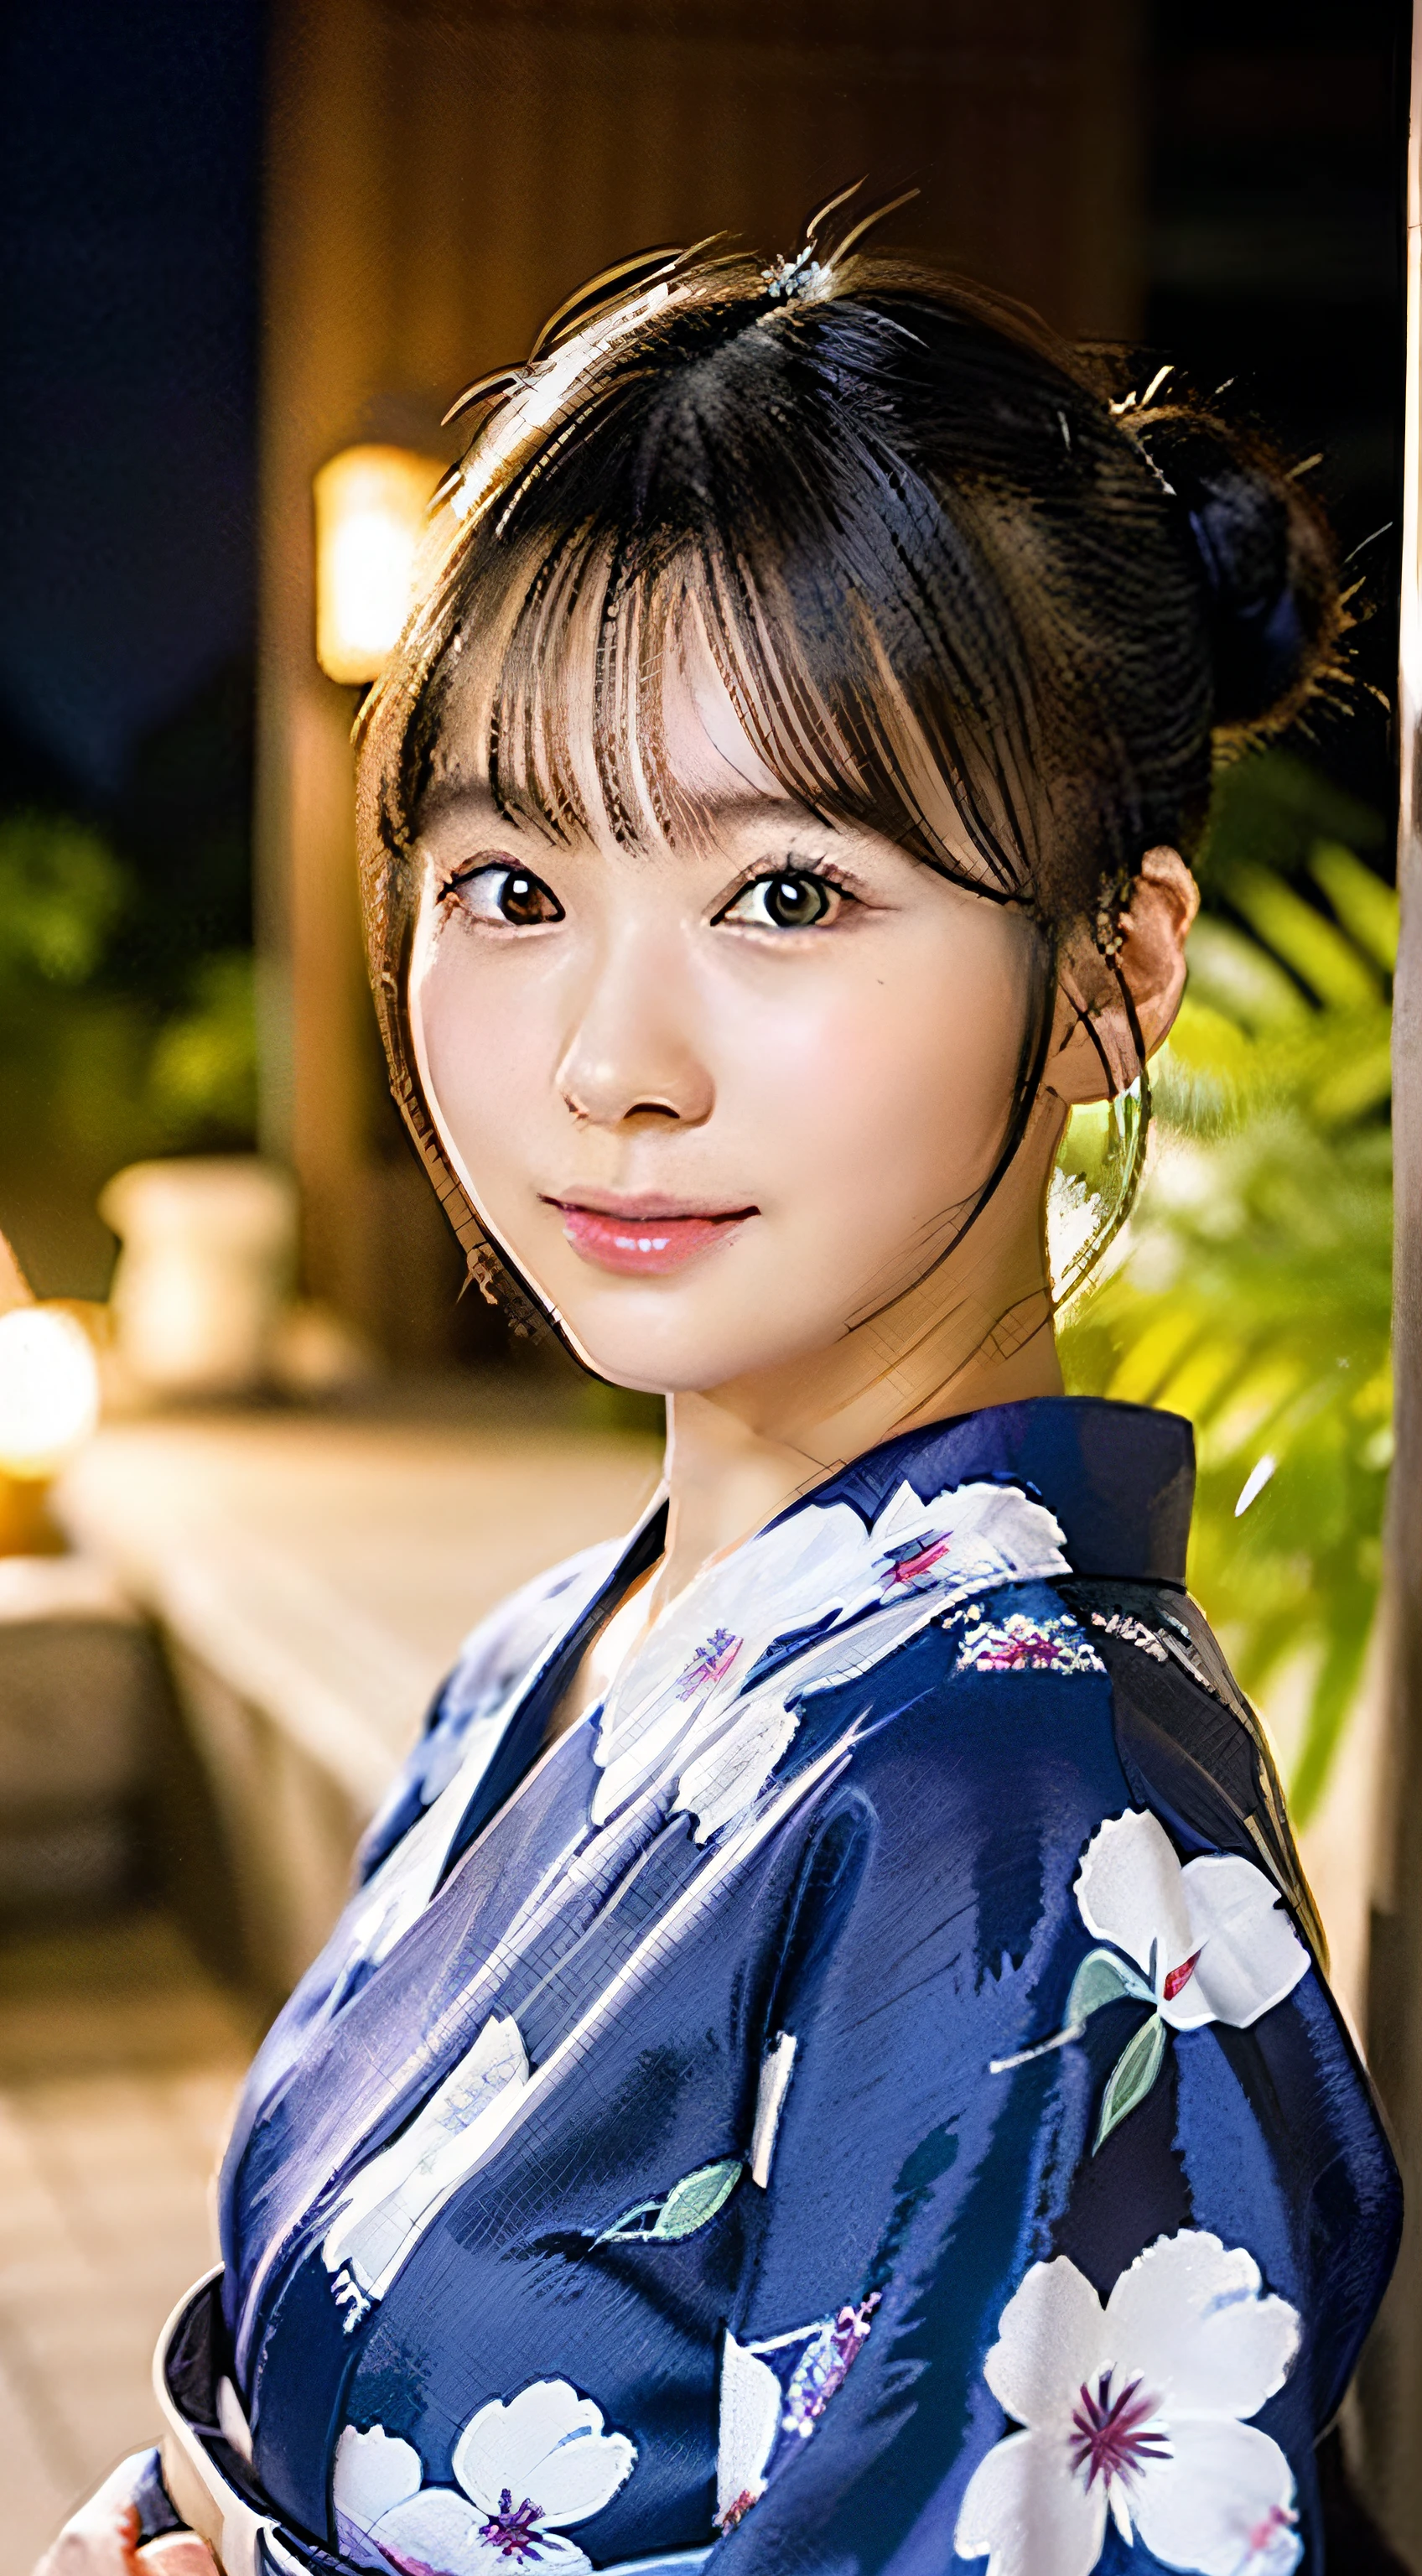 top-quality、finely detail、(((Beautiful One Girl)))、extremely detailed eye and face、Wistful expression、Cute yukata、Yukata with morning glory pattern、bathrobe、poneyTail、Big tear bag、Double eyelids、The precincts of the shrine at night、The background is a little dark,